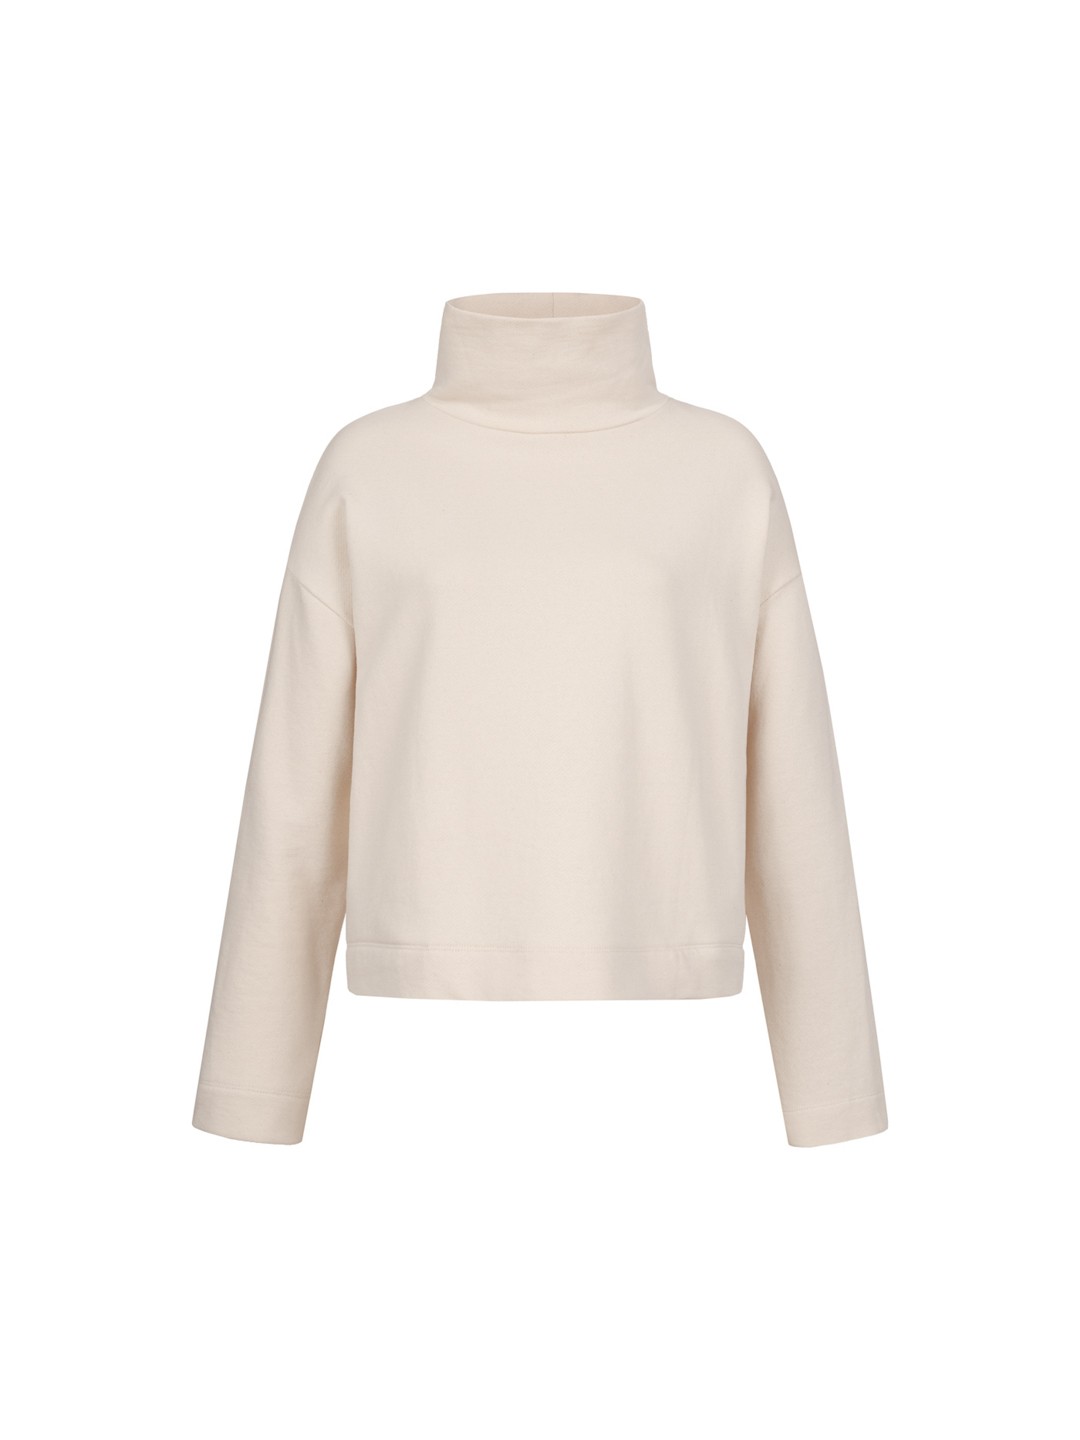 Velvet sweatshirt with stand-up collar made of organic cotton - natural 